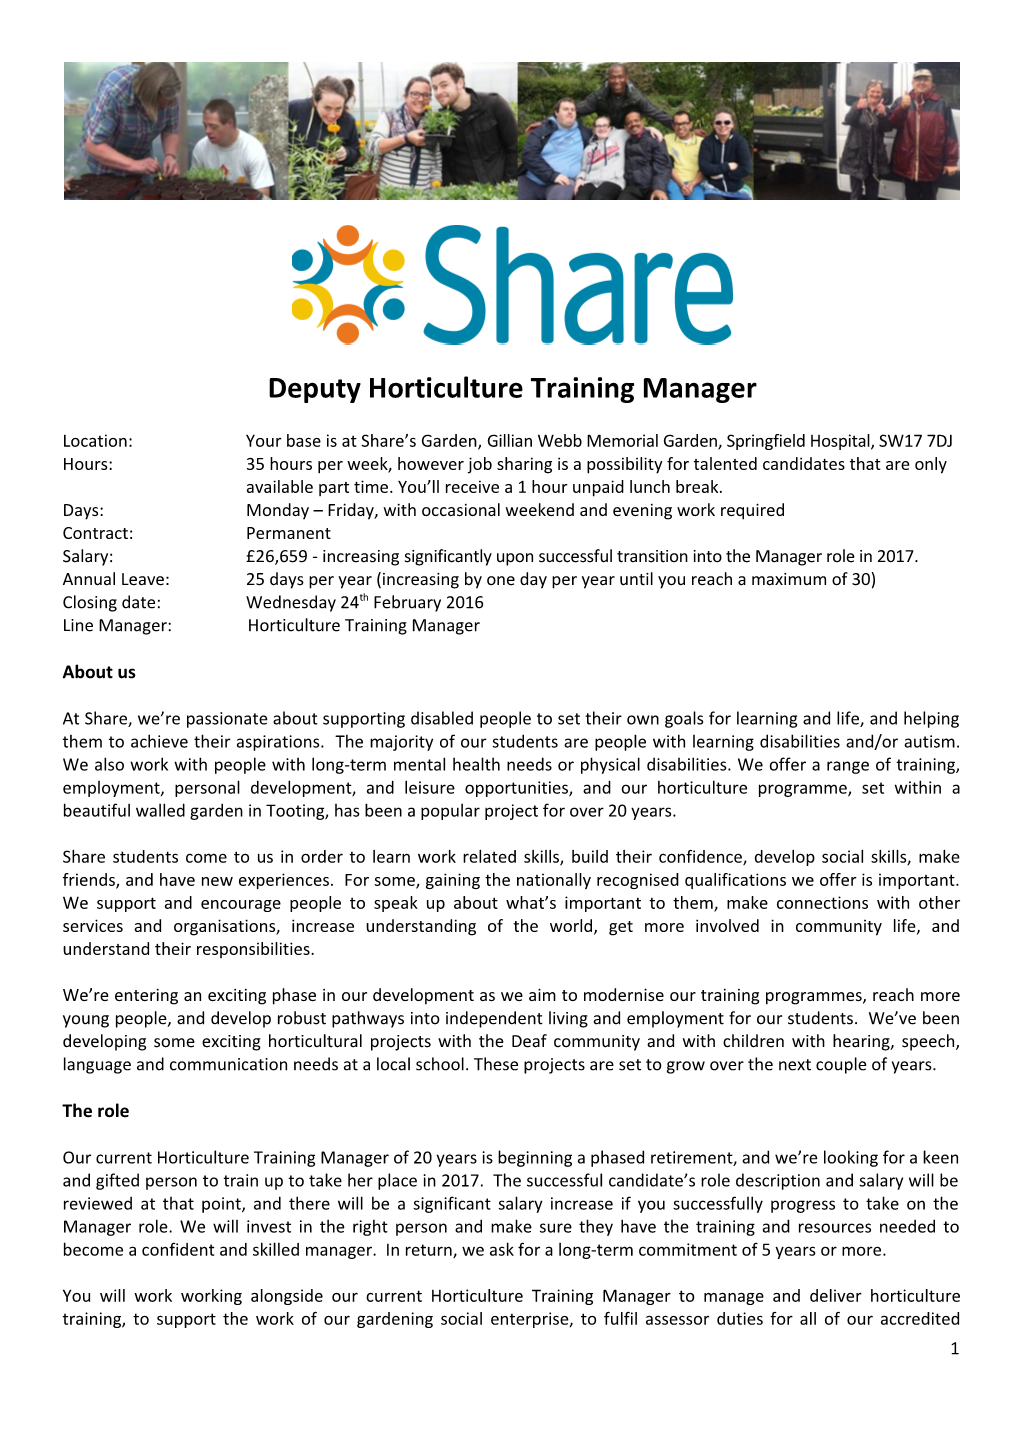 Deputy Horticulture Training Manager